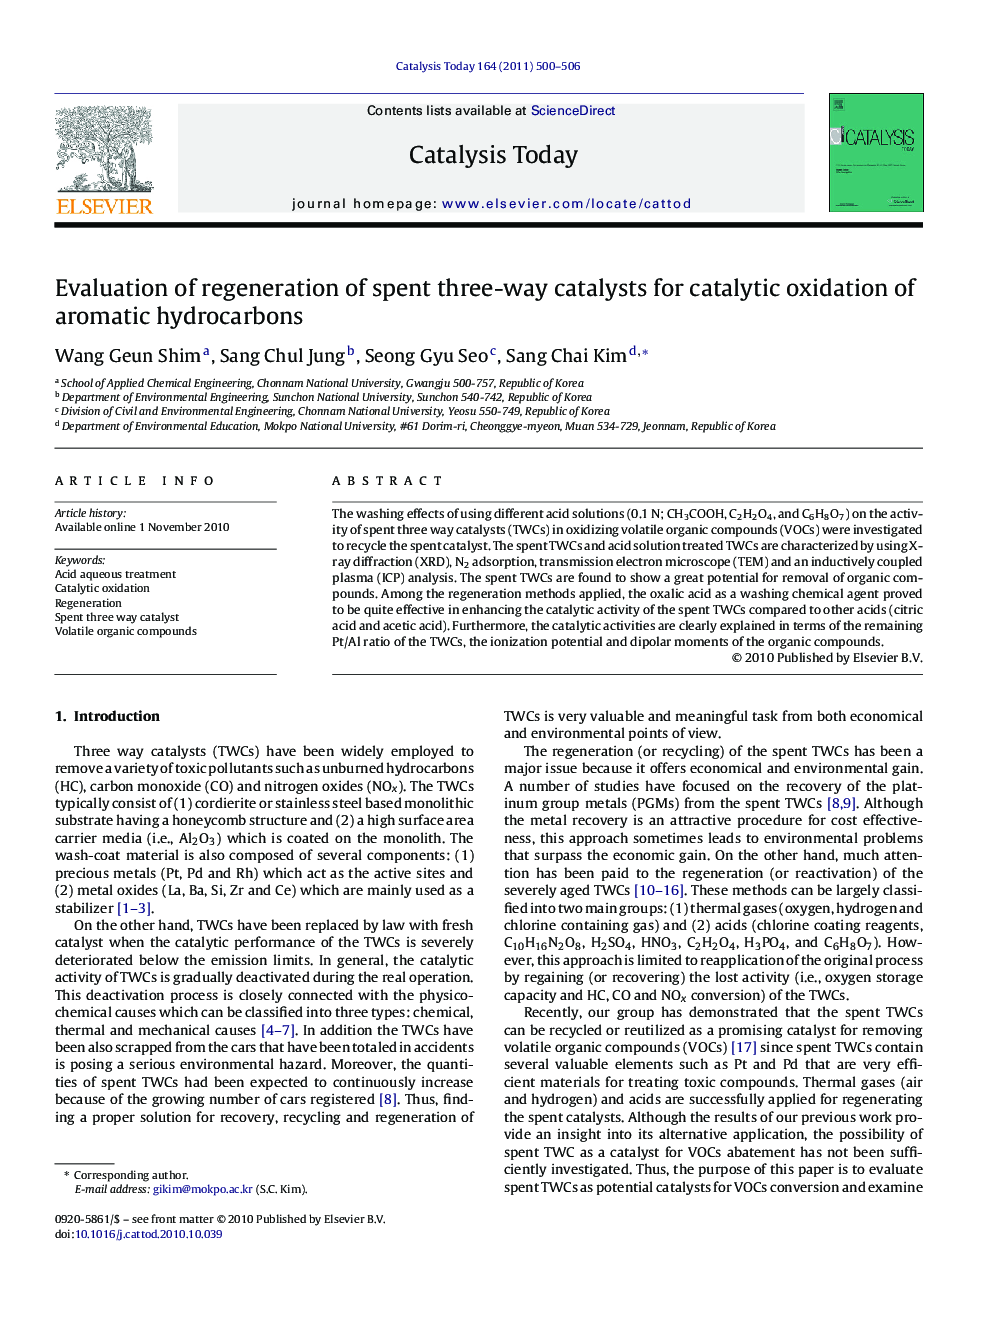 Evaluation of regeneration of spent three-way catalysts for catalytic oxidation of aromatic hydrocarbons